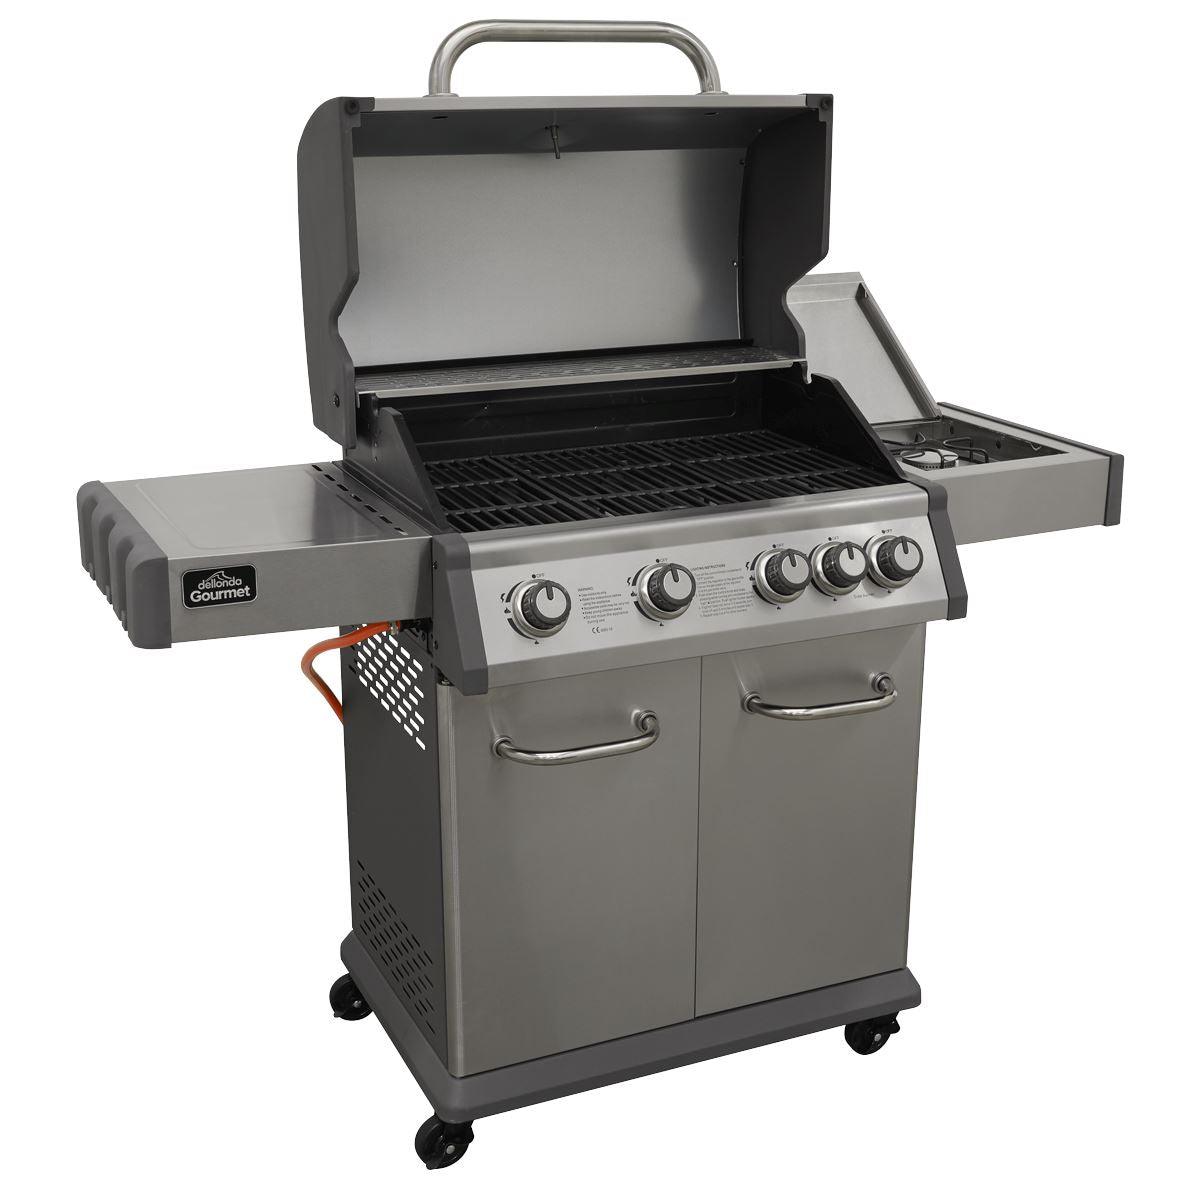 Dellonda 4+1 Burner Deluxe Gas BBQ Grill, Stainless Steel, Side Burner, Ignition DG17 - Tools 2U Direct SW